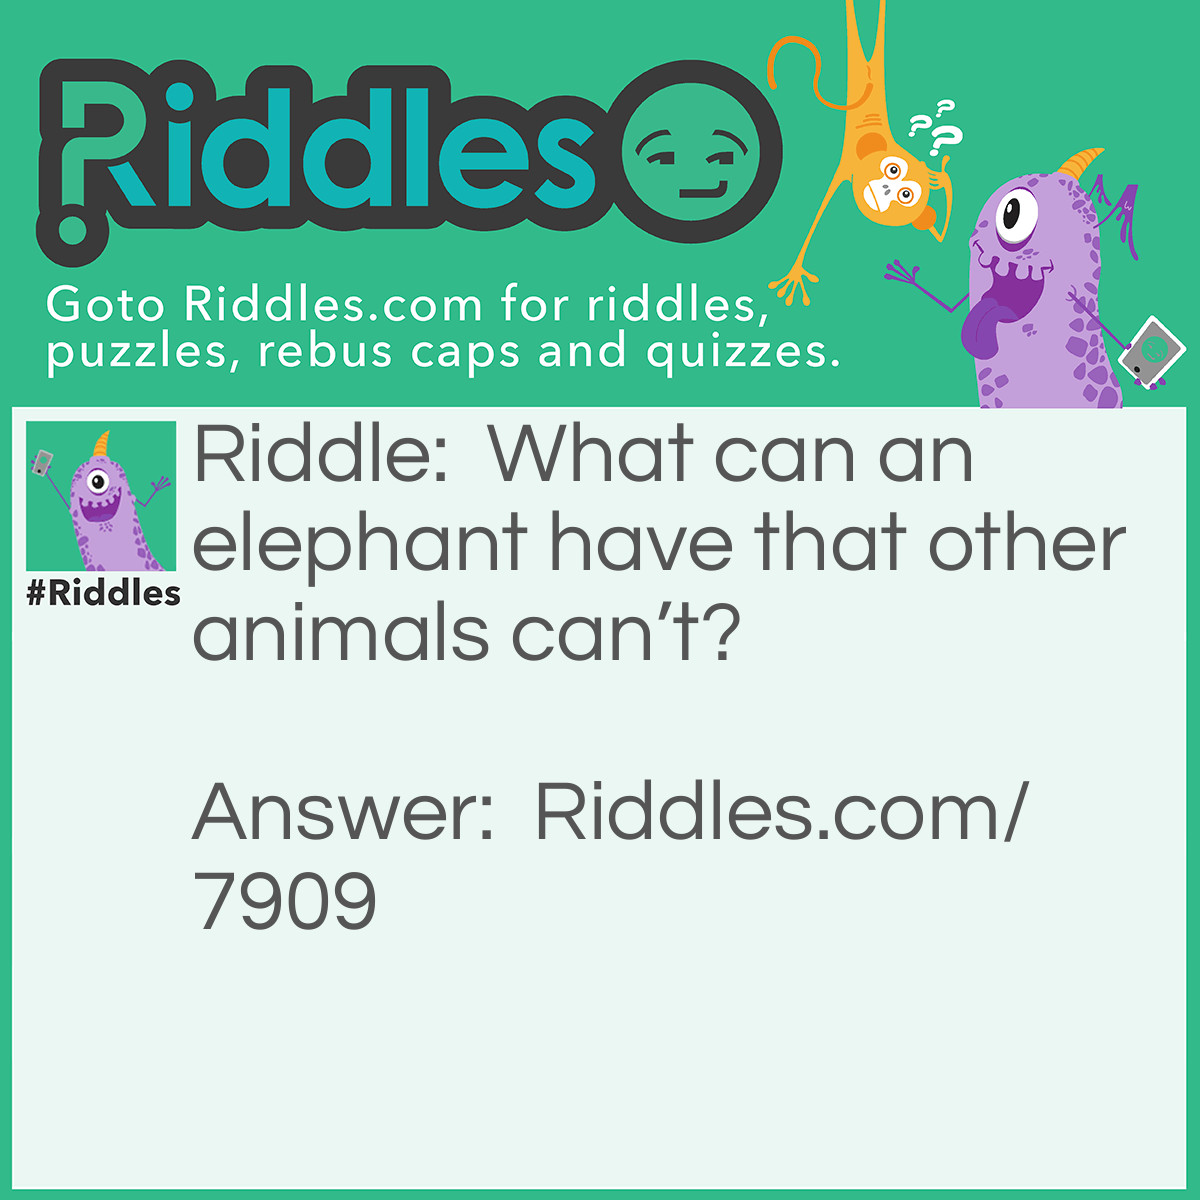 Riddle: What can an elephant have that other animals can't? Answer: A baby elephant.